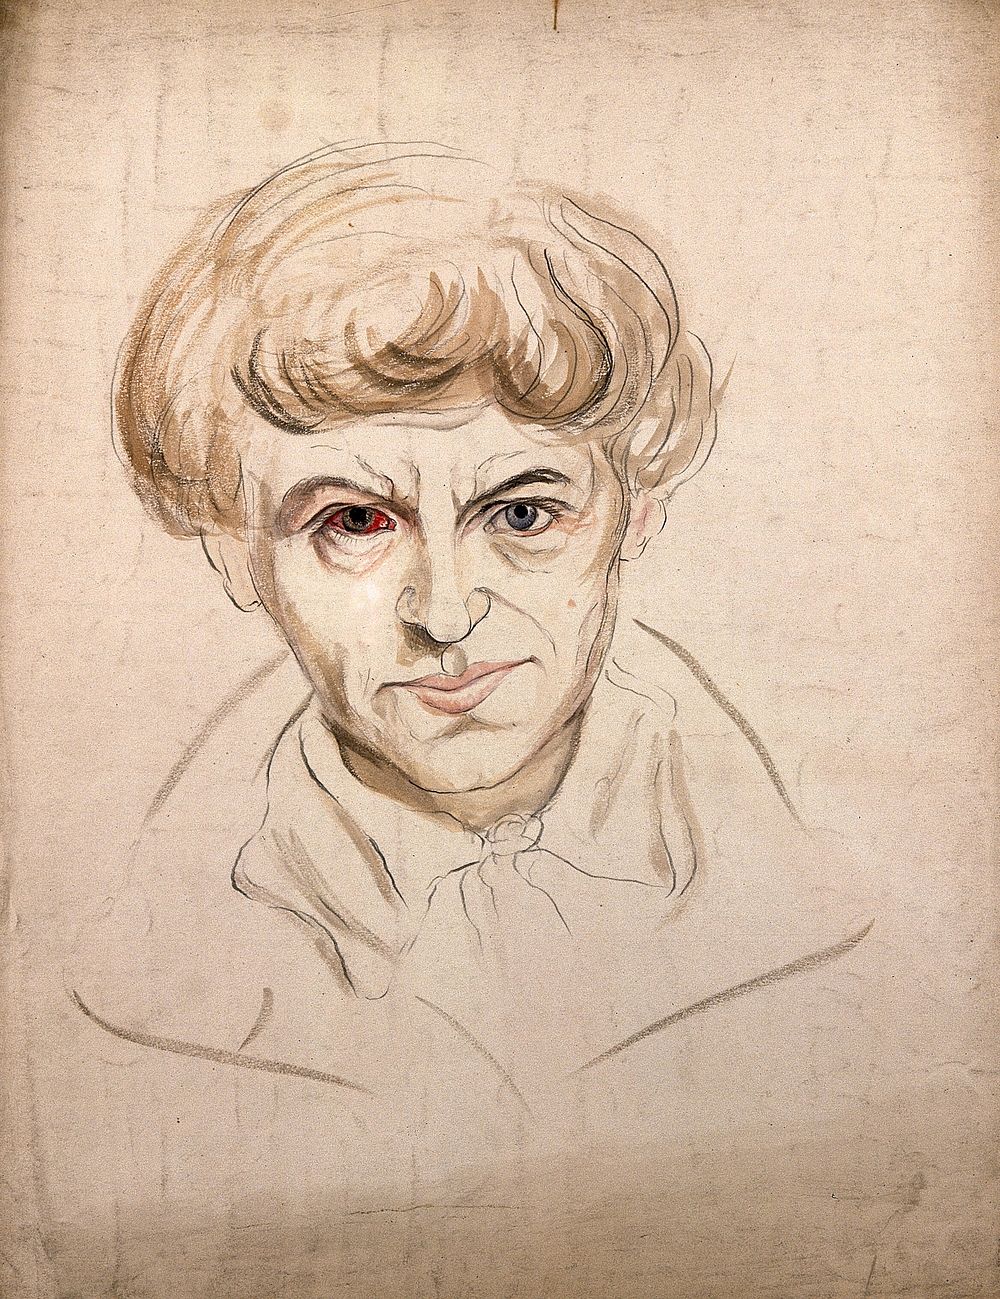 Head of a man with a disease affecting his eye. Watercolour by Christopher D' Alton, 1857.